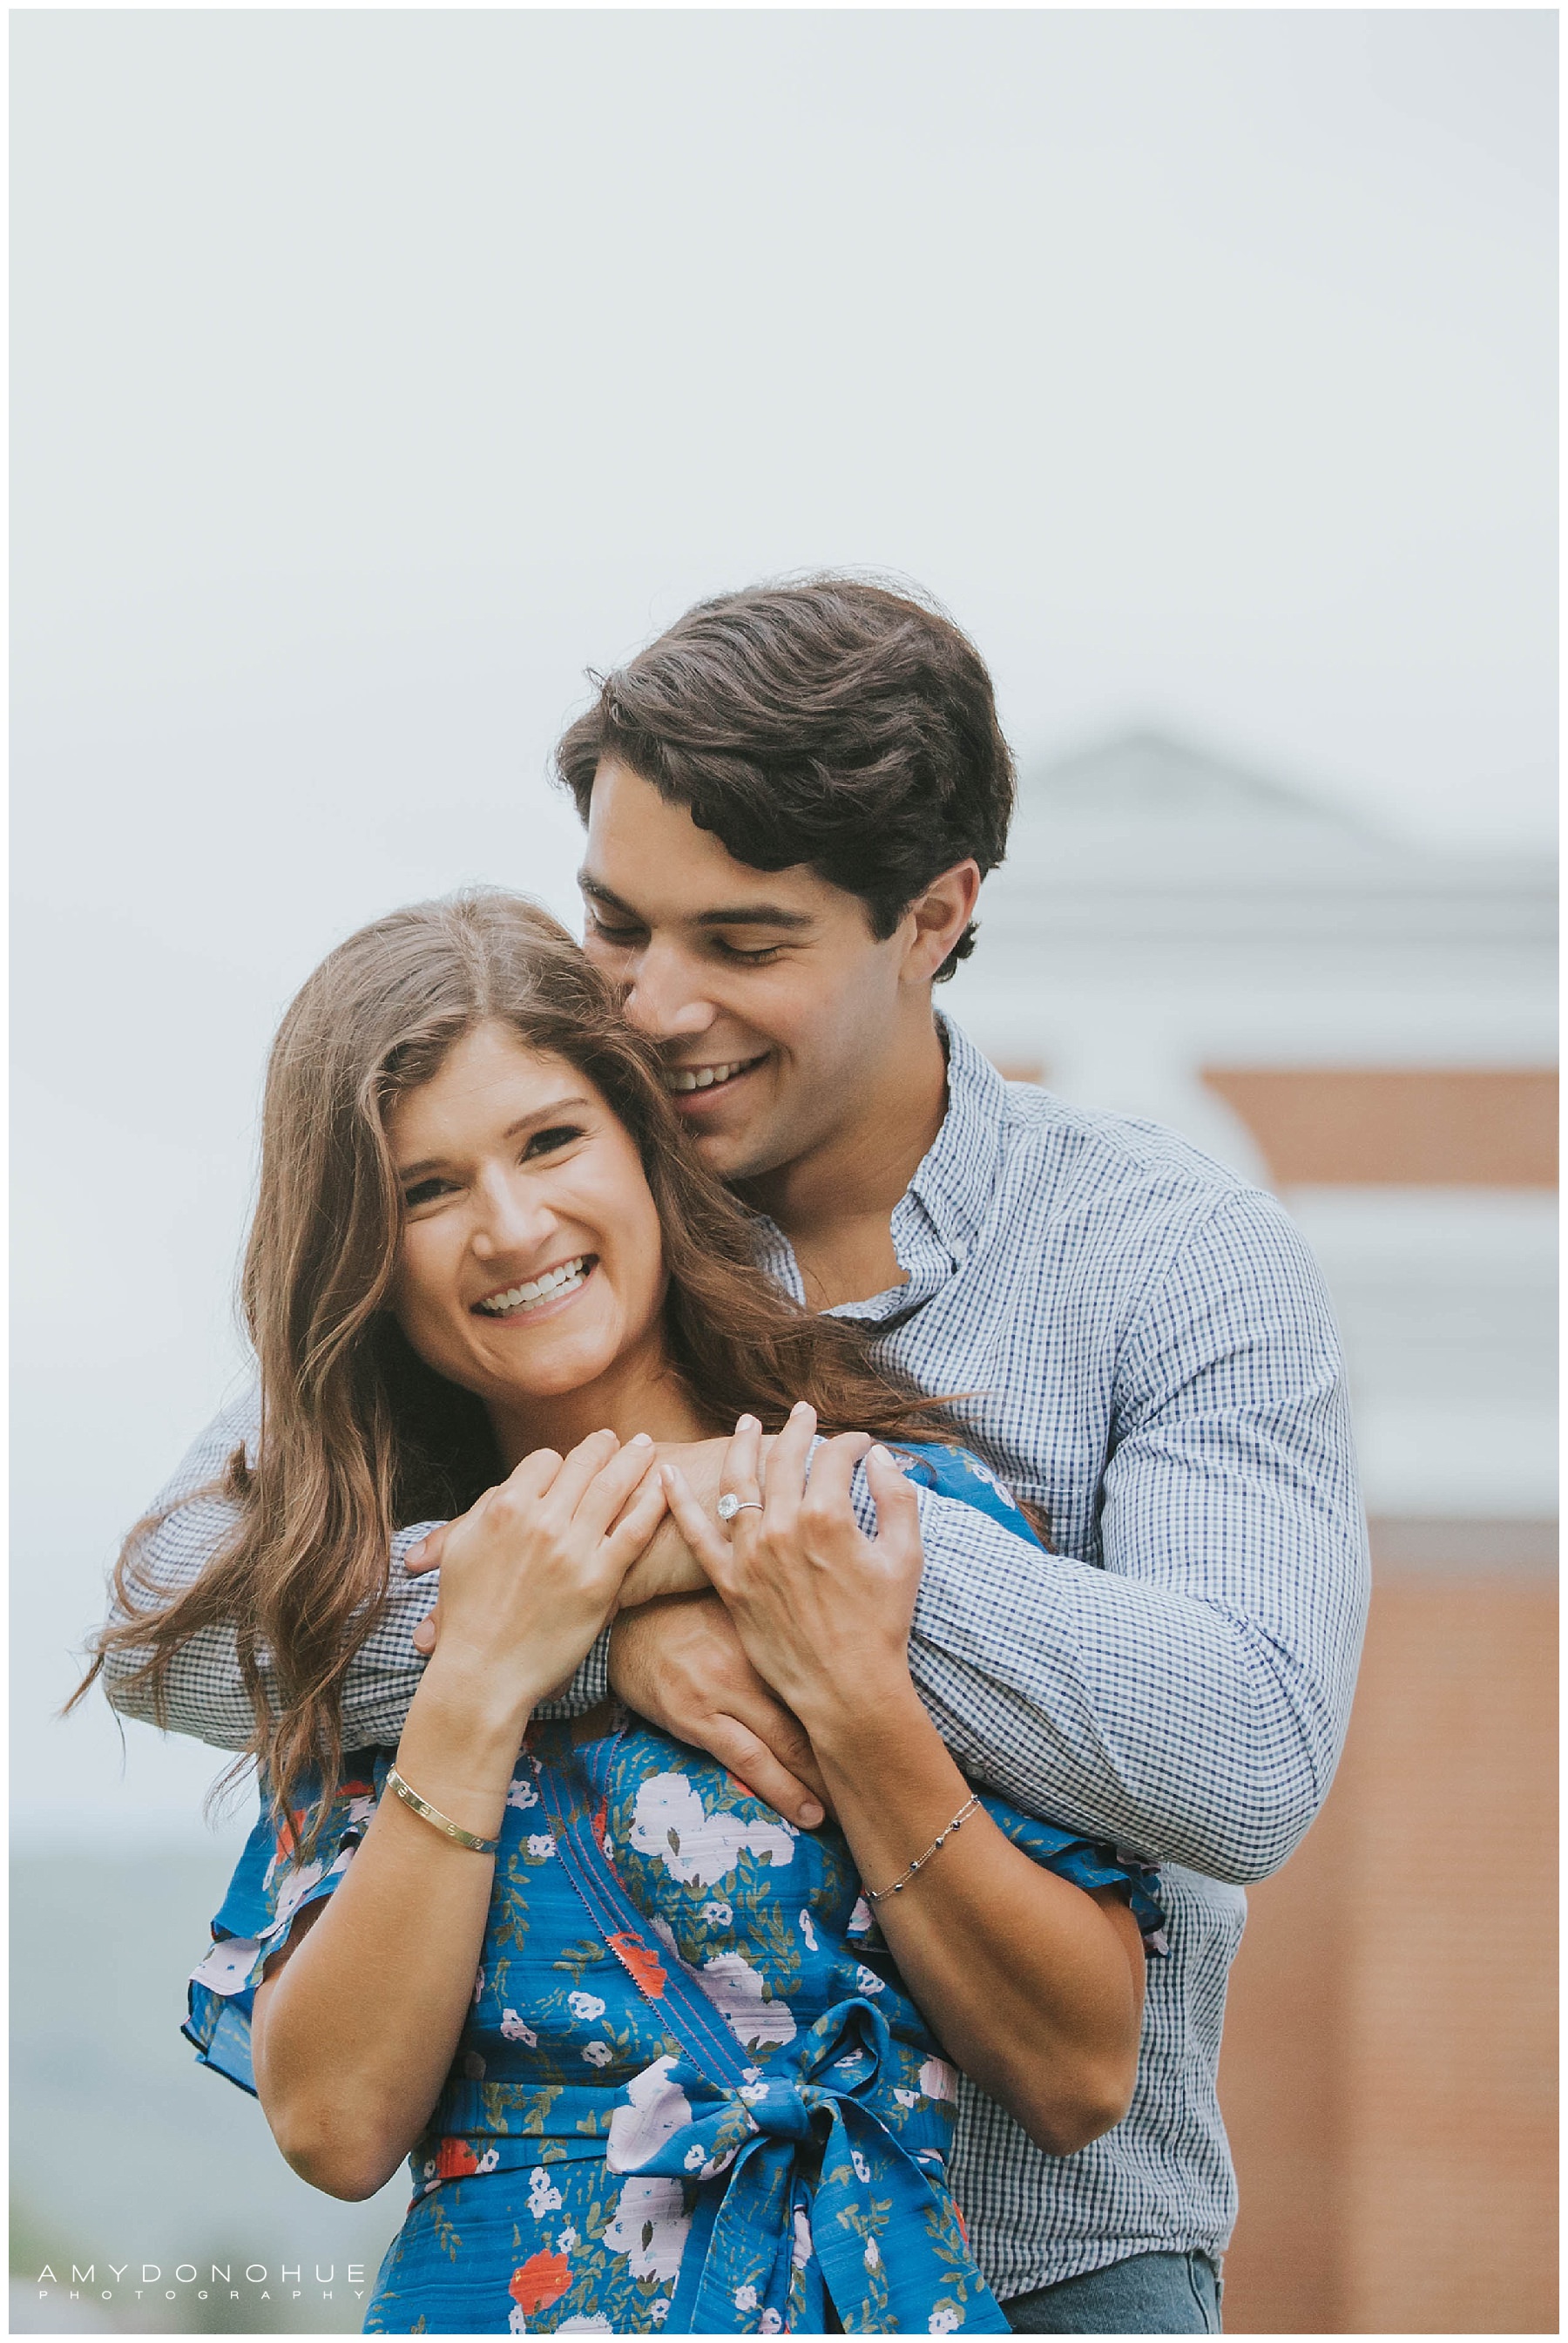 Hanover New Hampshire Engagement and Wedding Photographer | © Amy Donohue Photography